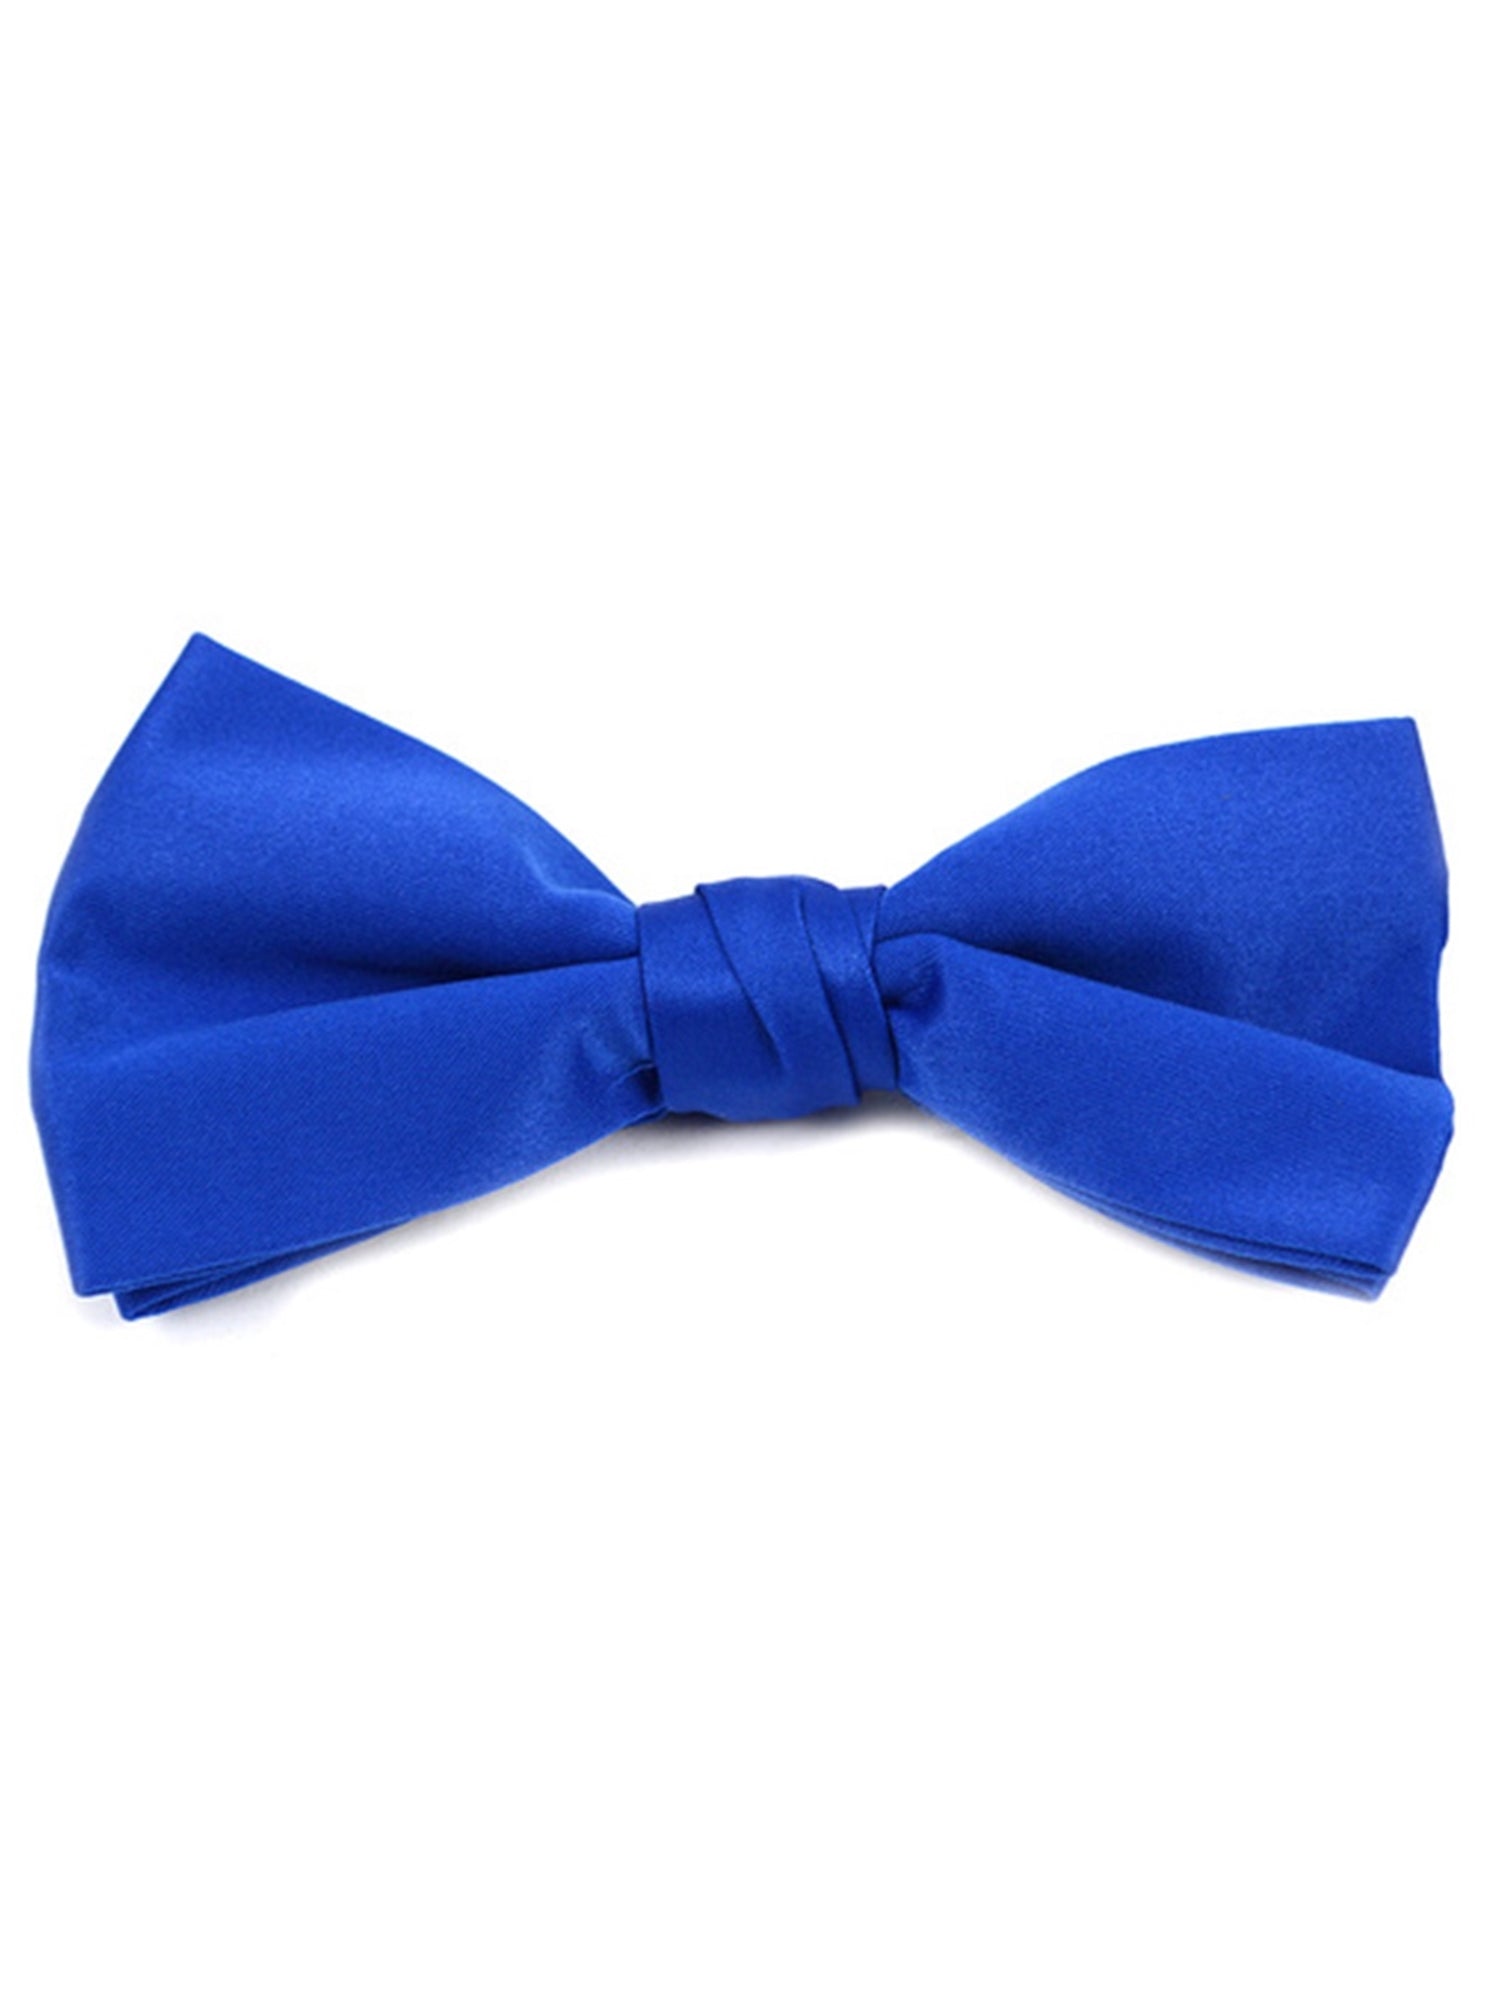 Men's Pre-tied Clip On Bow Tie - Formal Tuxedo Solid Color Men's Solid Color Bow Tie TheDapperTie Royal Blue One Size 